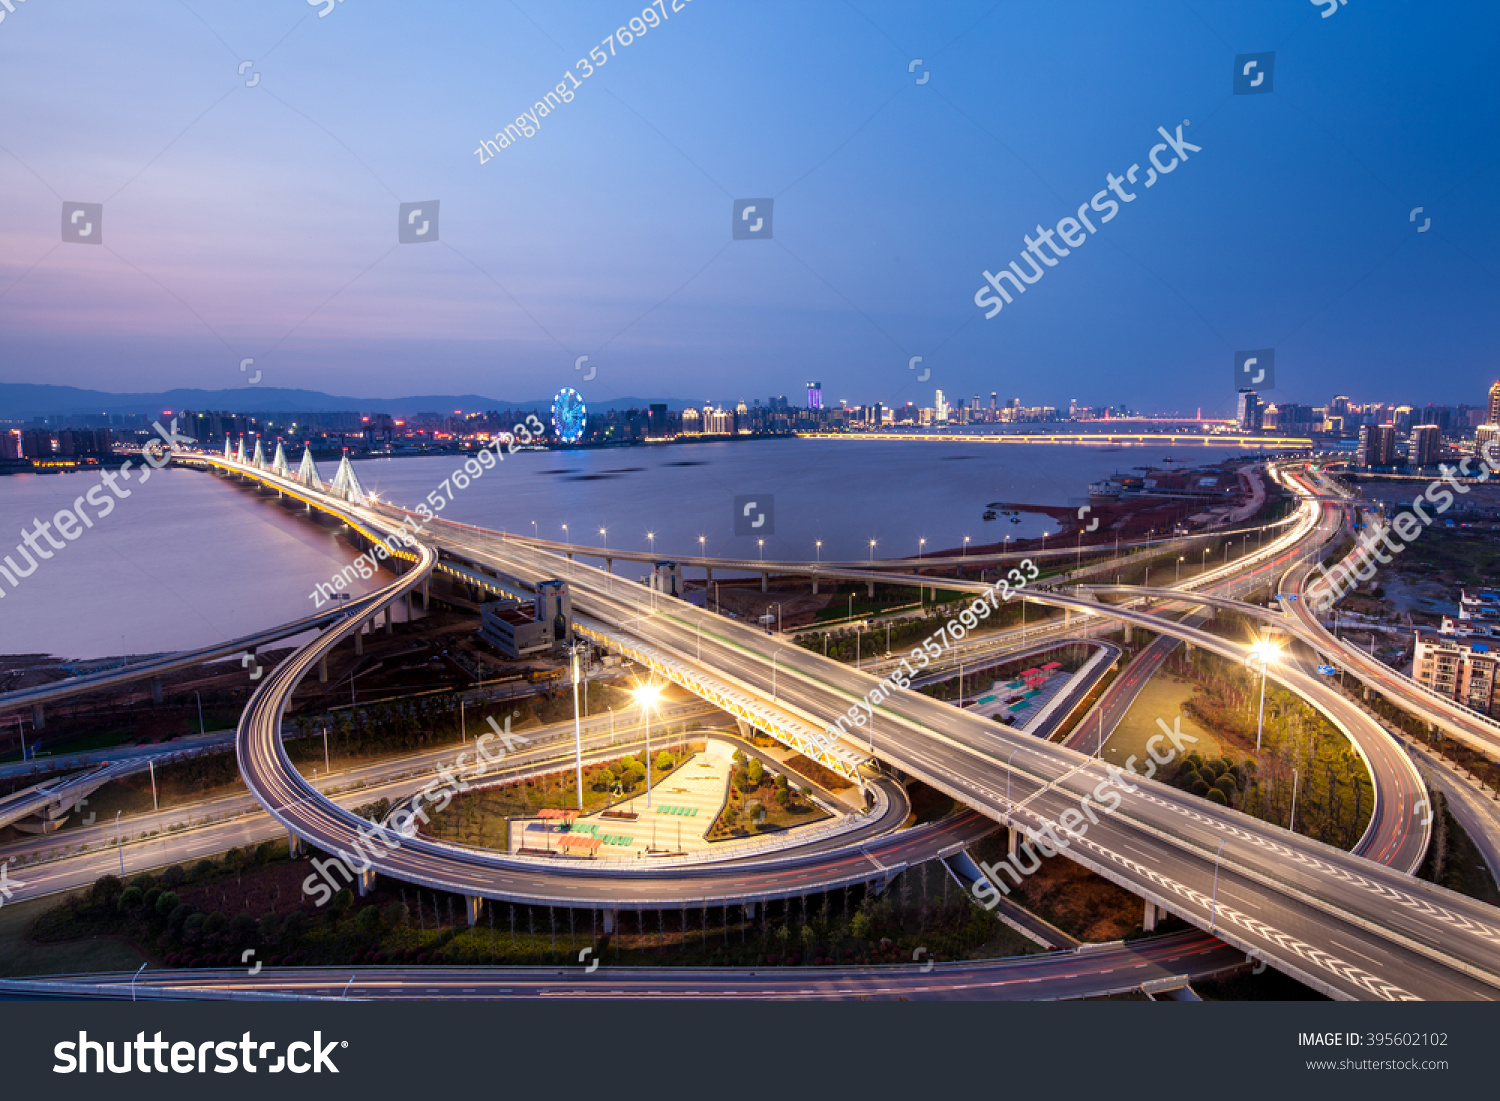 Asia's largest across the rivers in Shanghai landmarks a spiral bridge at night #395602102